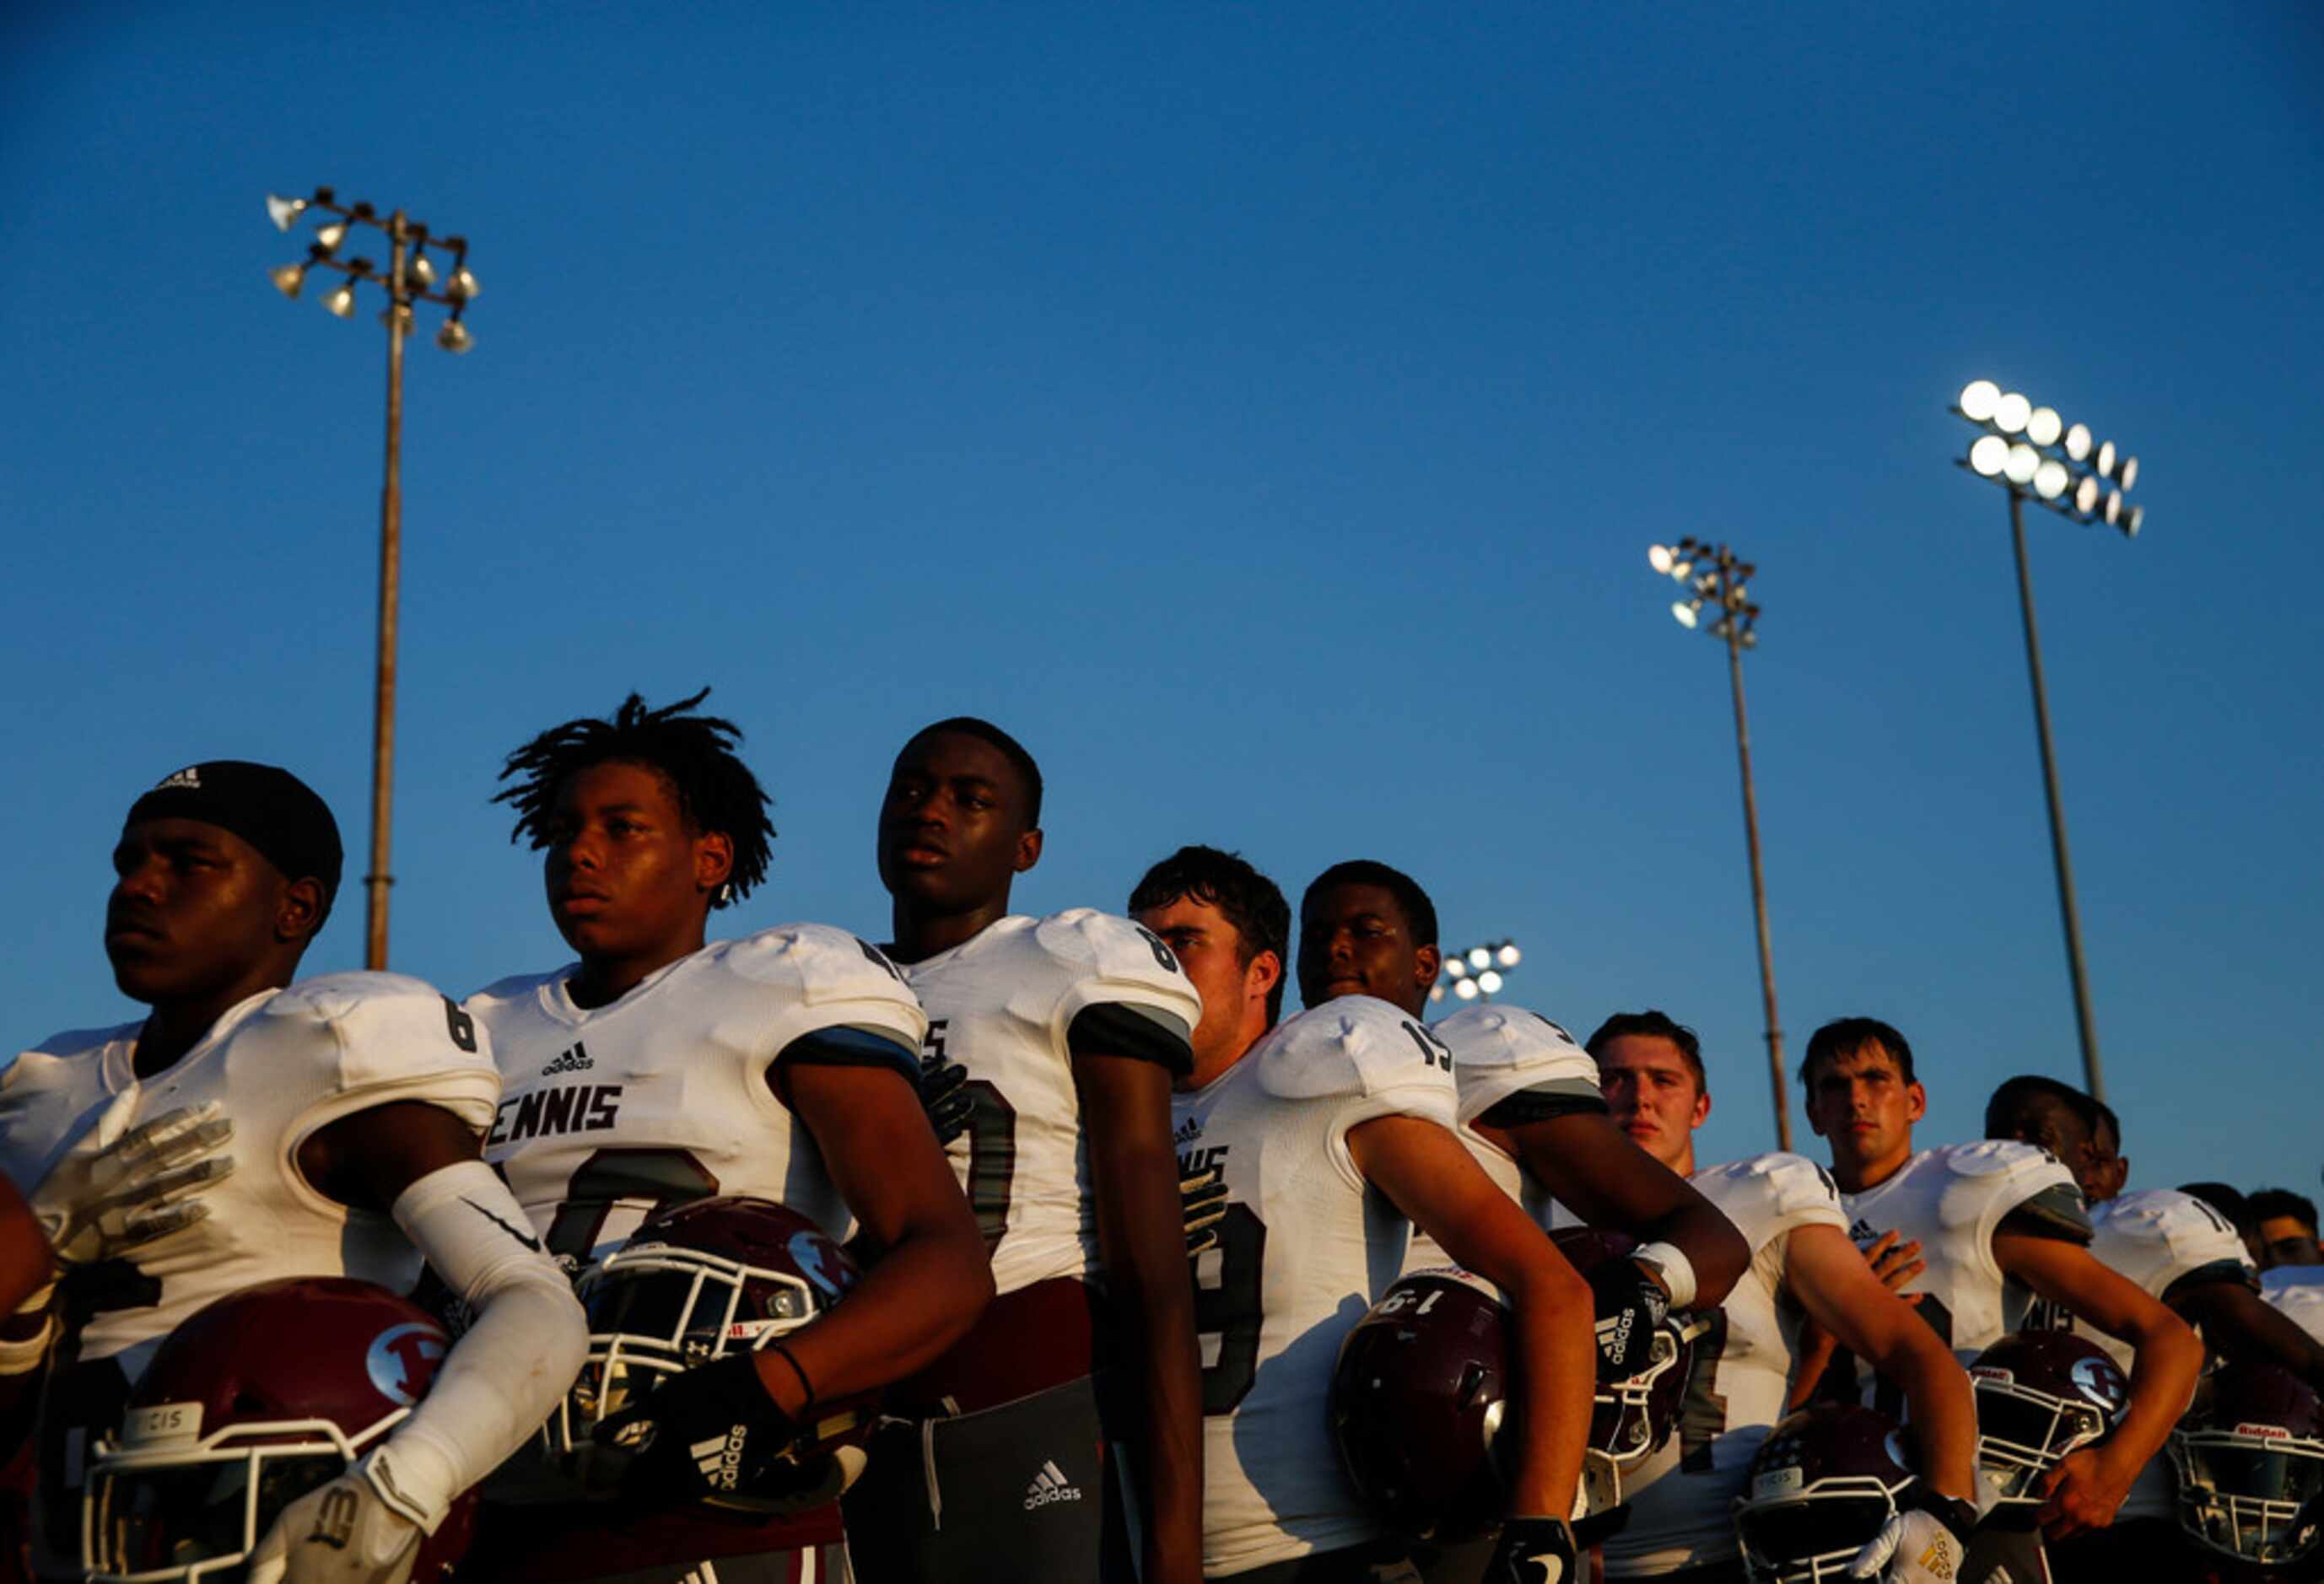 The Ennis Lions line up for the national anthem prior to a high school football game between...